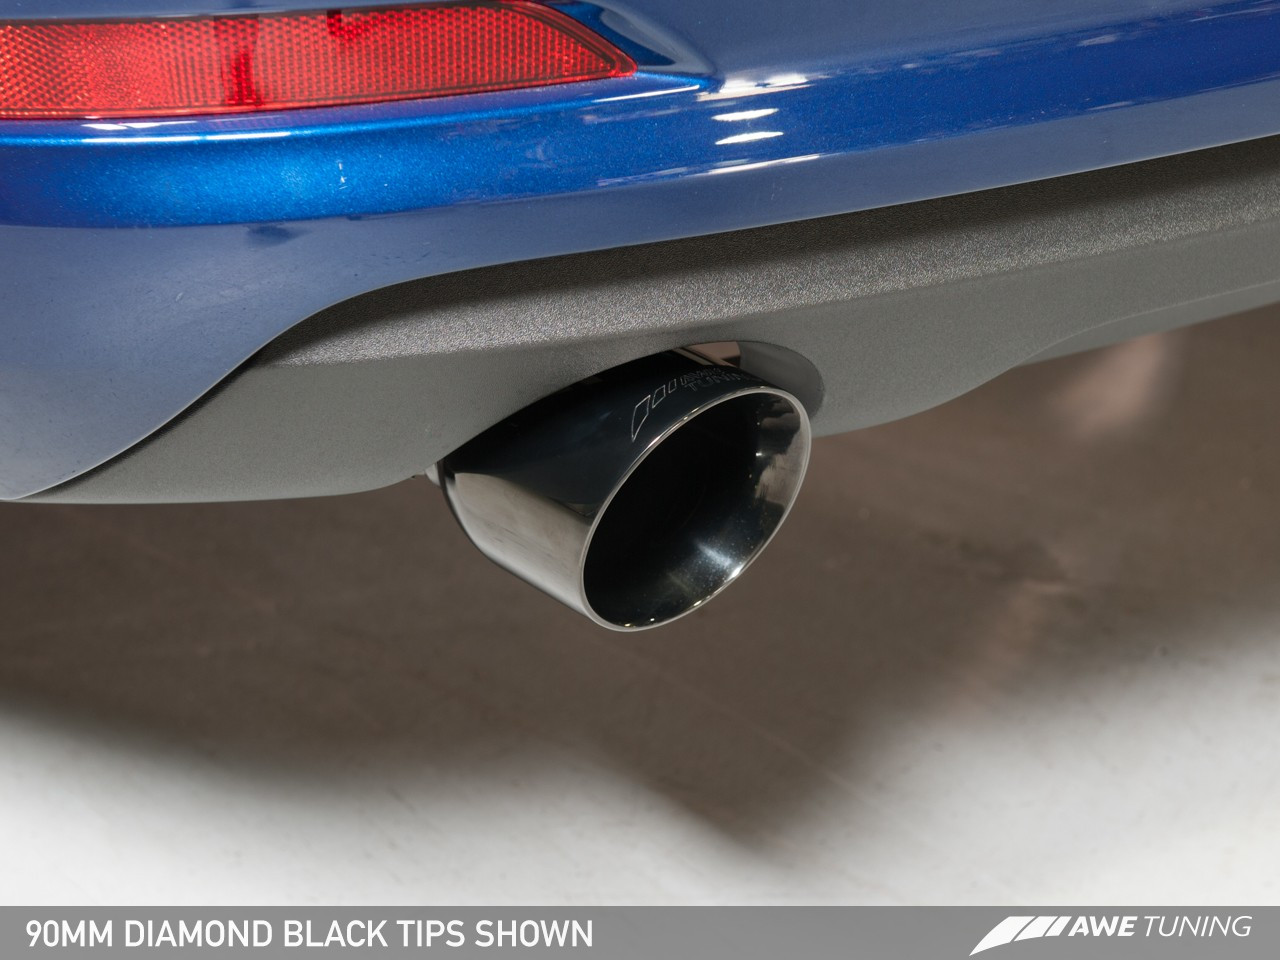 AWE Touring Edition Catback Exhaust for 8V A3 2.0T Quattro